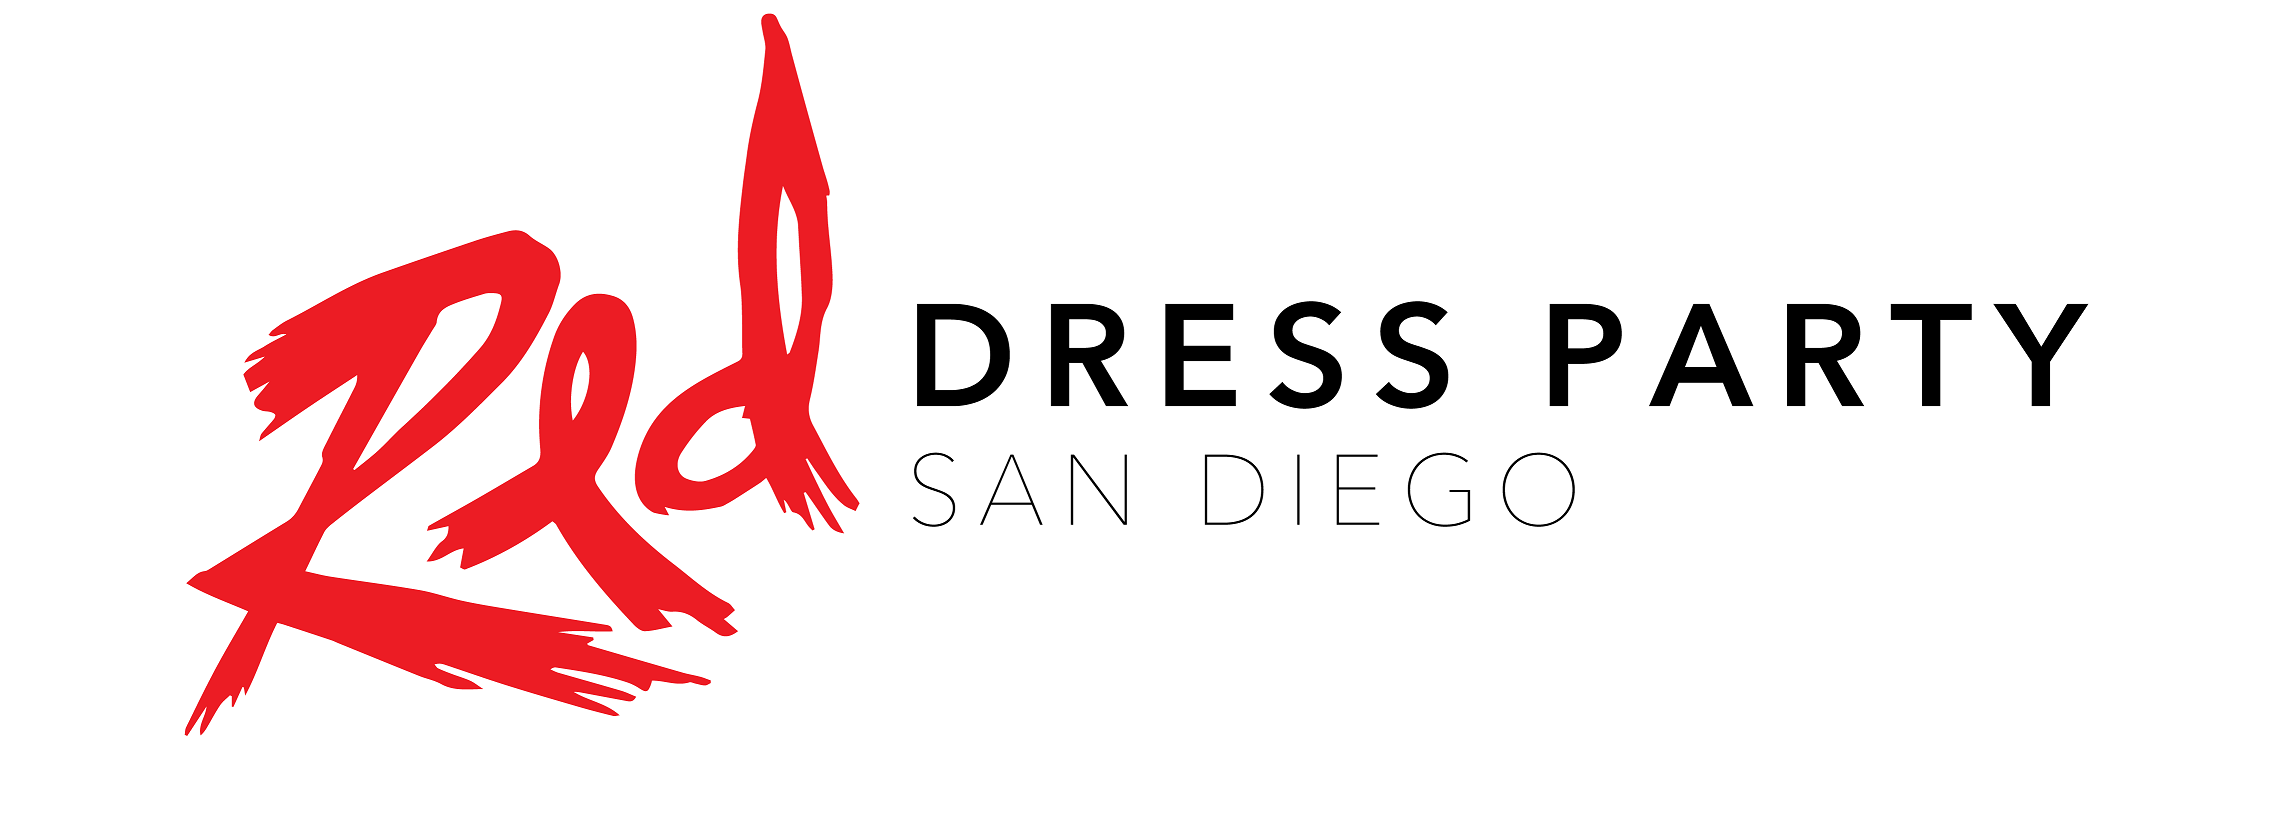 San Brand Red Logo - About Red Dress Party SD - Red Dress Party San Diego